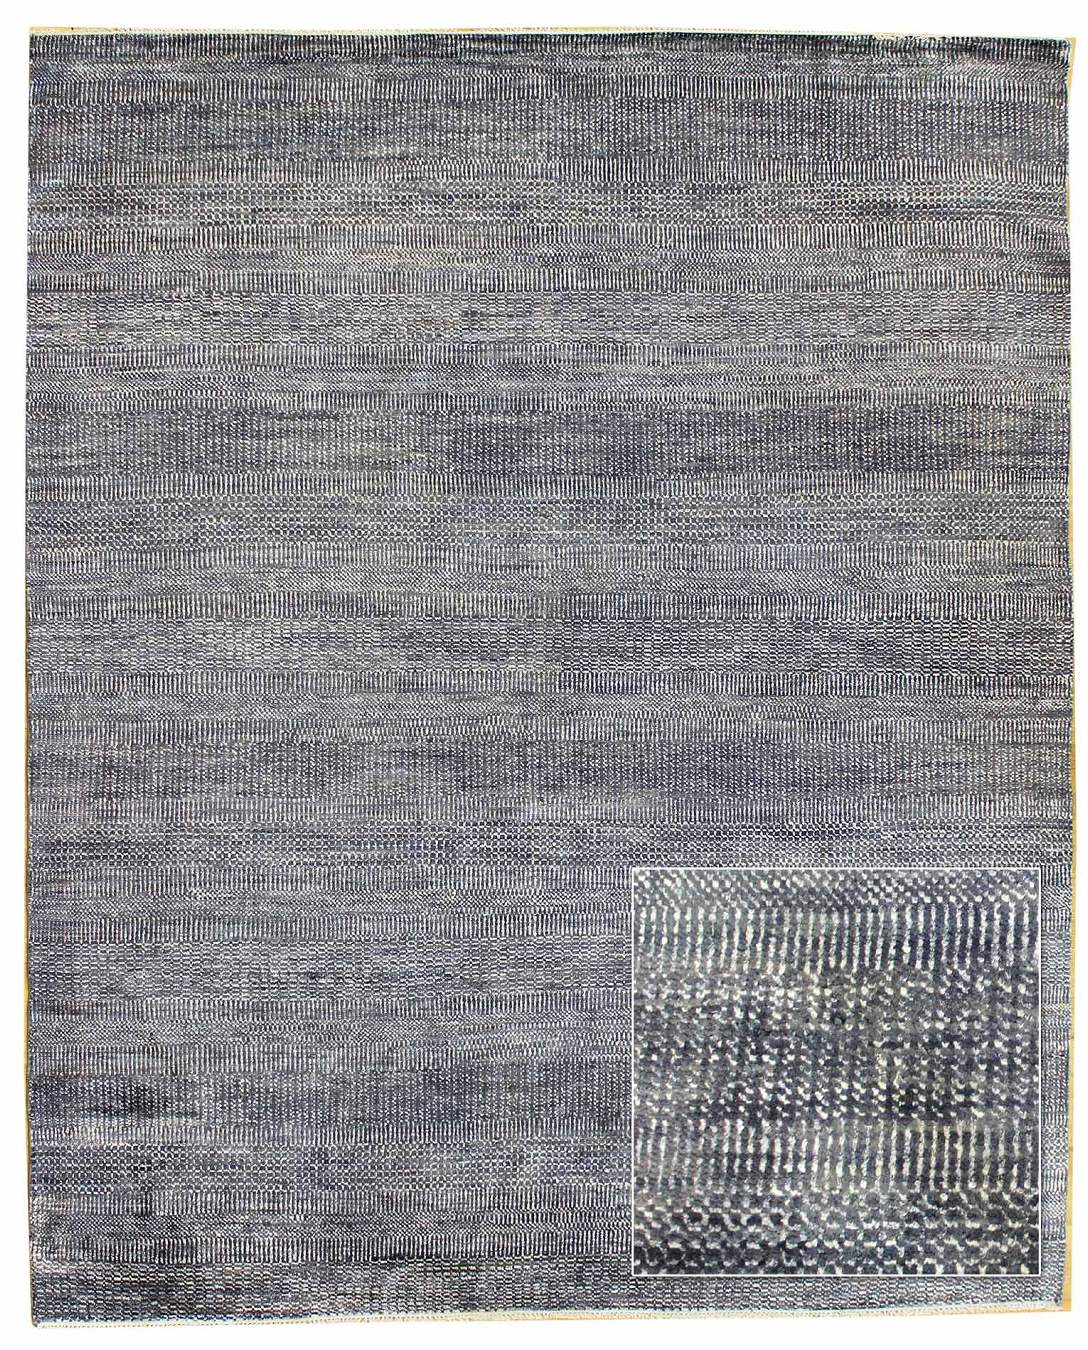 Illusion Pattern Handwoven Contemporary Rug